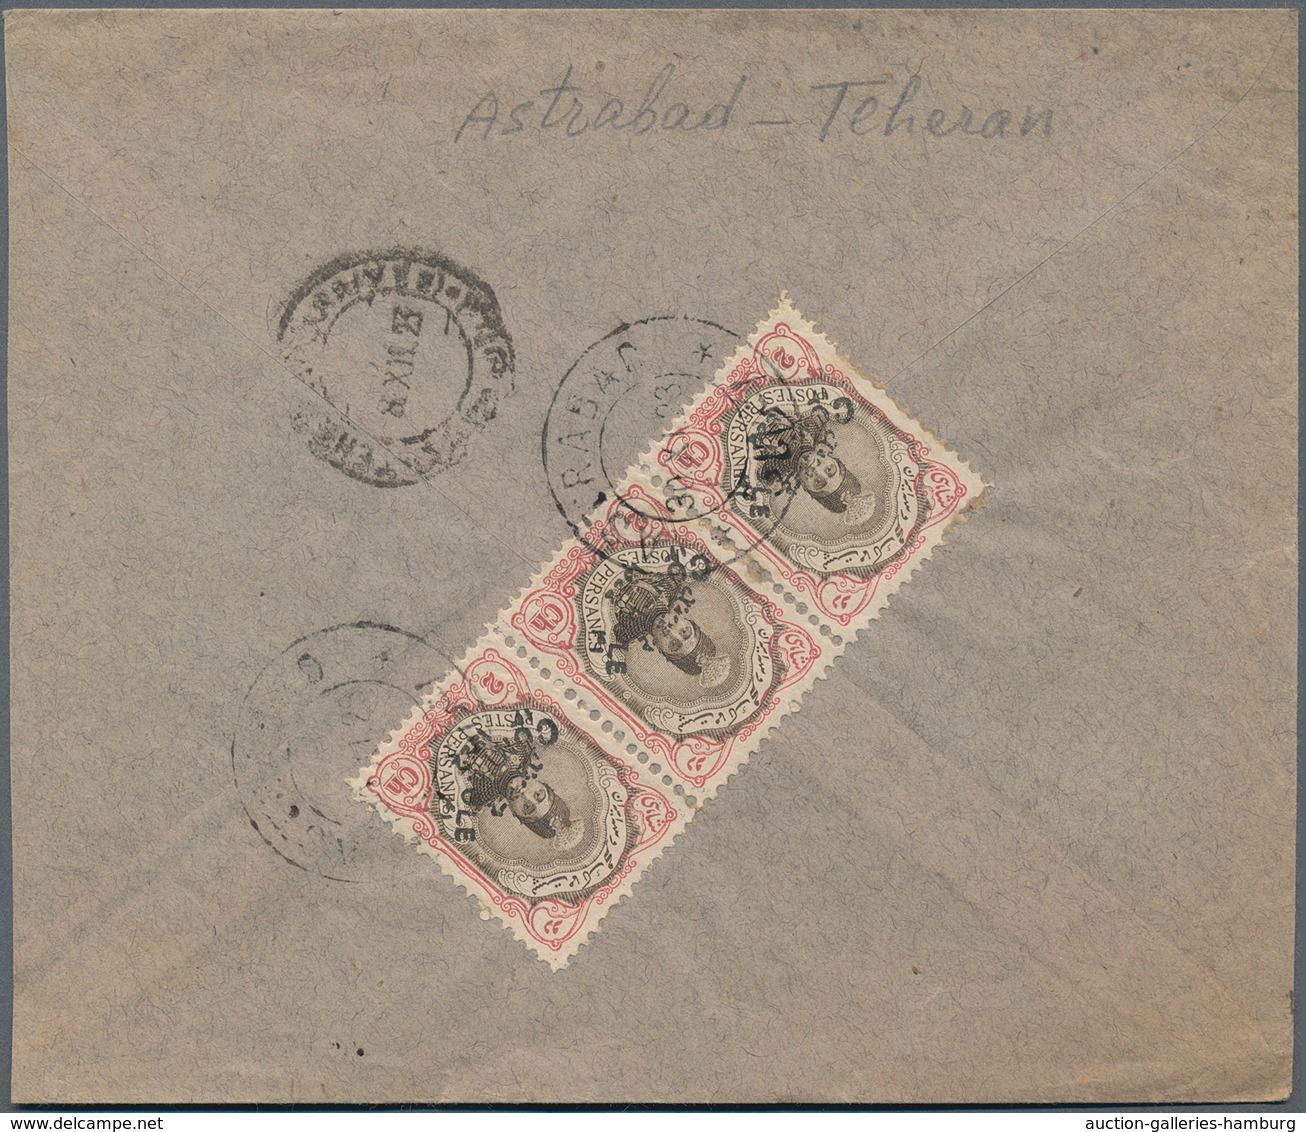 Iran: 1876/1976 (ca.), outstanding accumulation of more than 130 pieces, covers, parcel bills and po